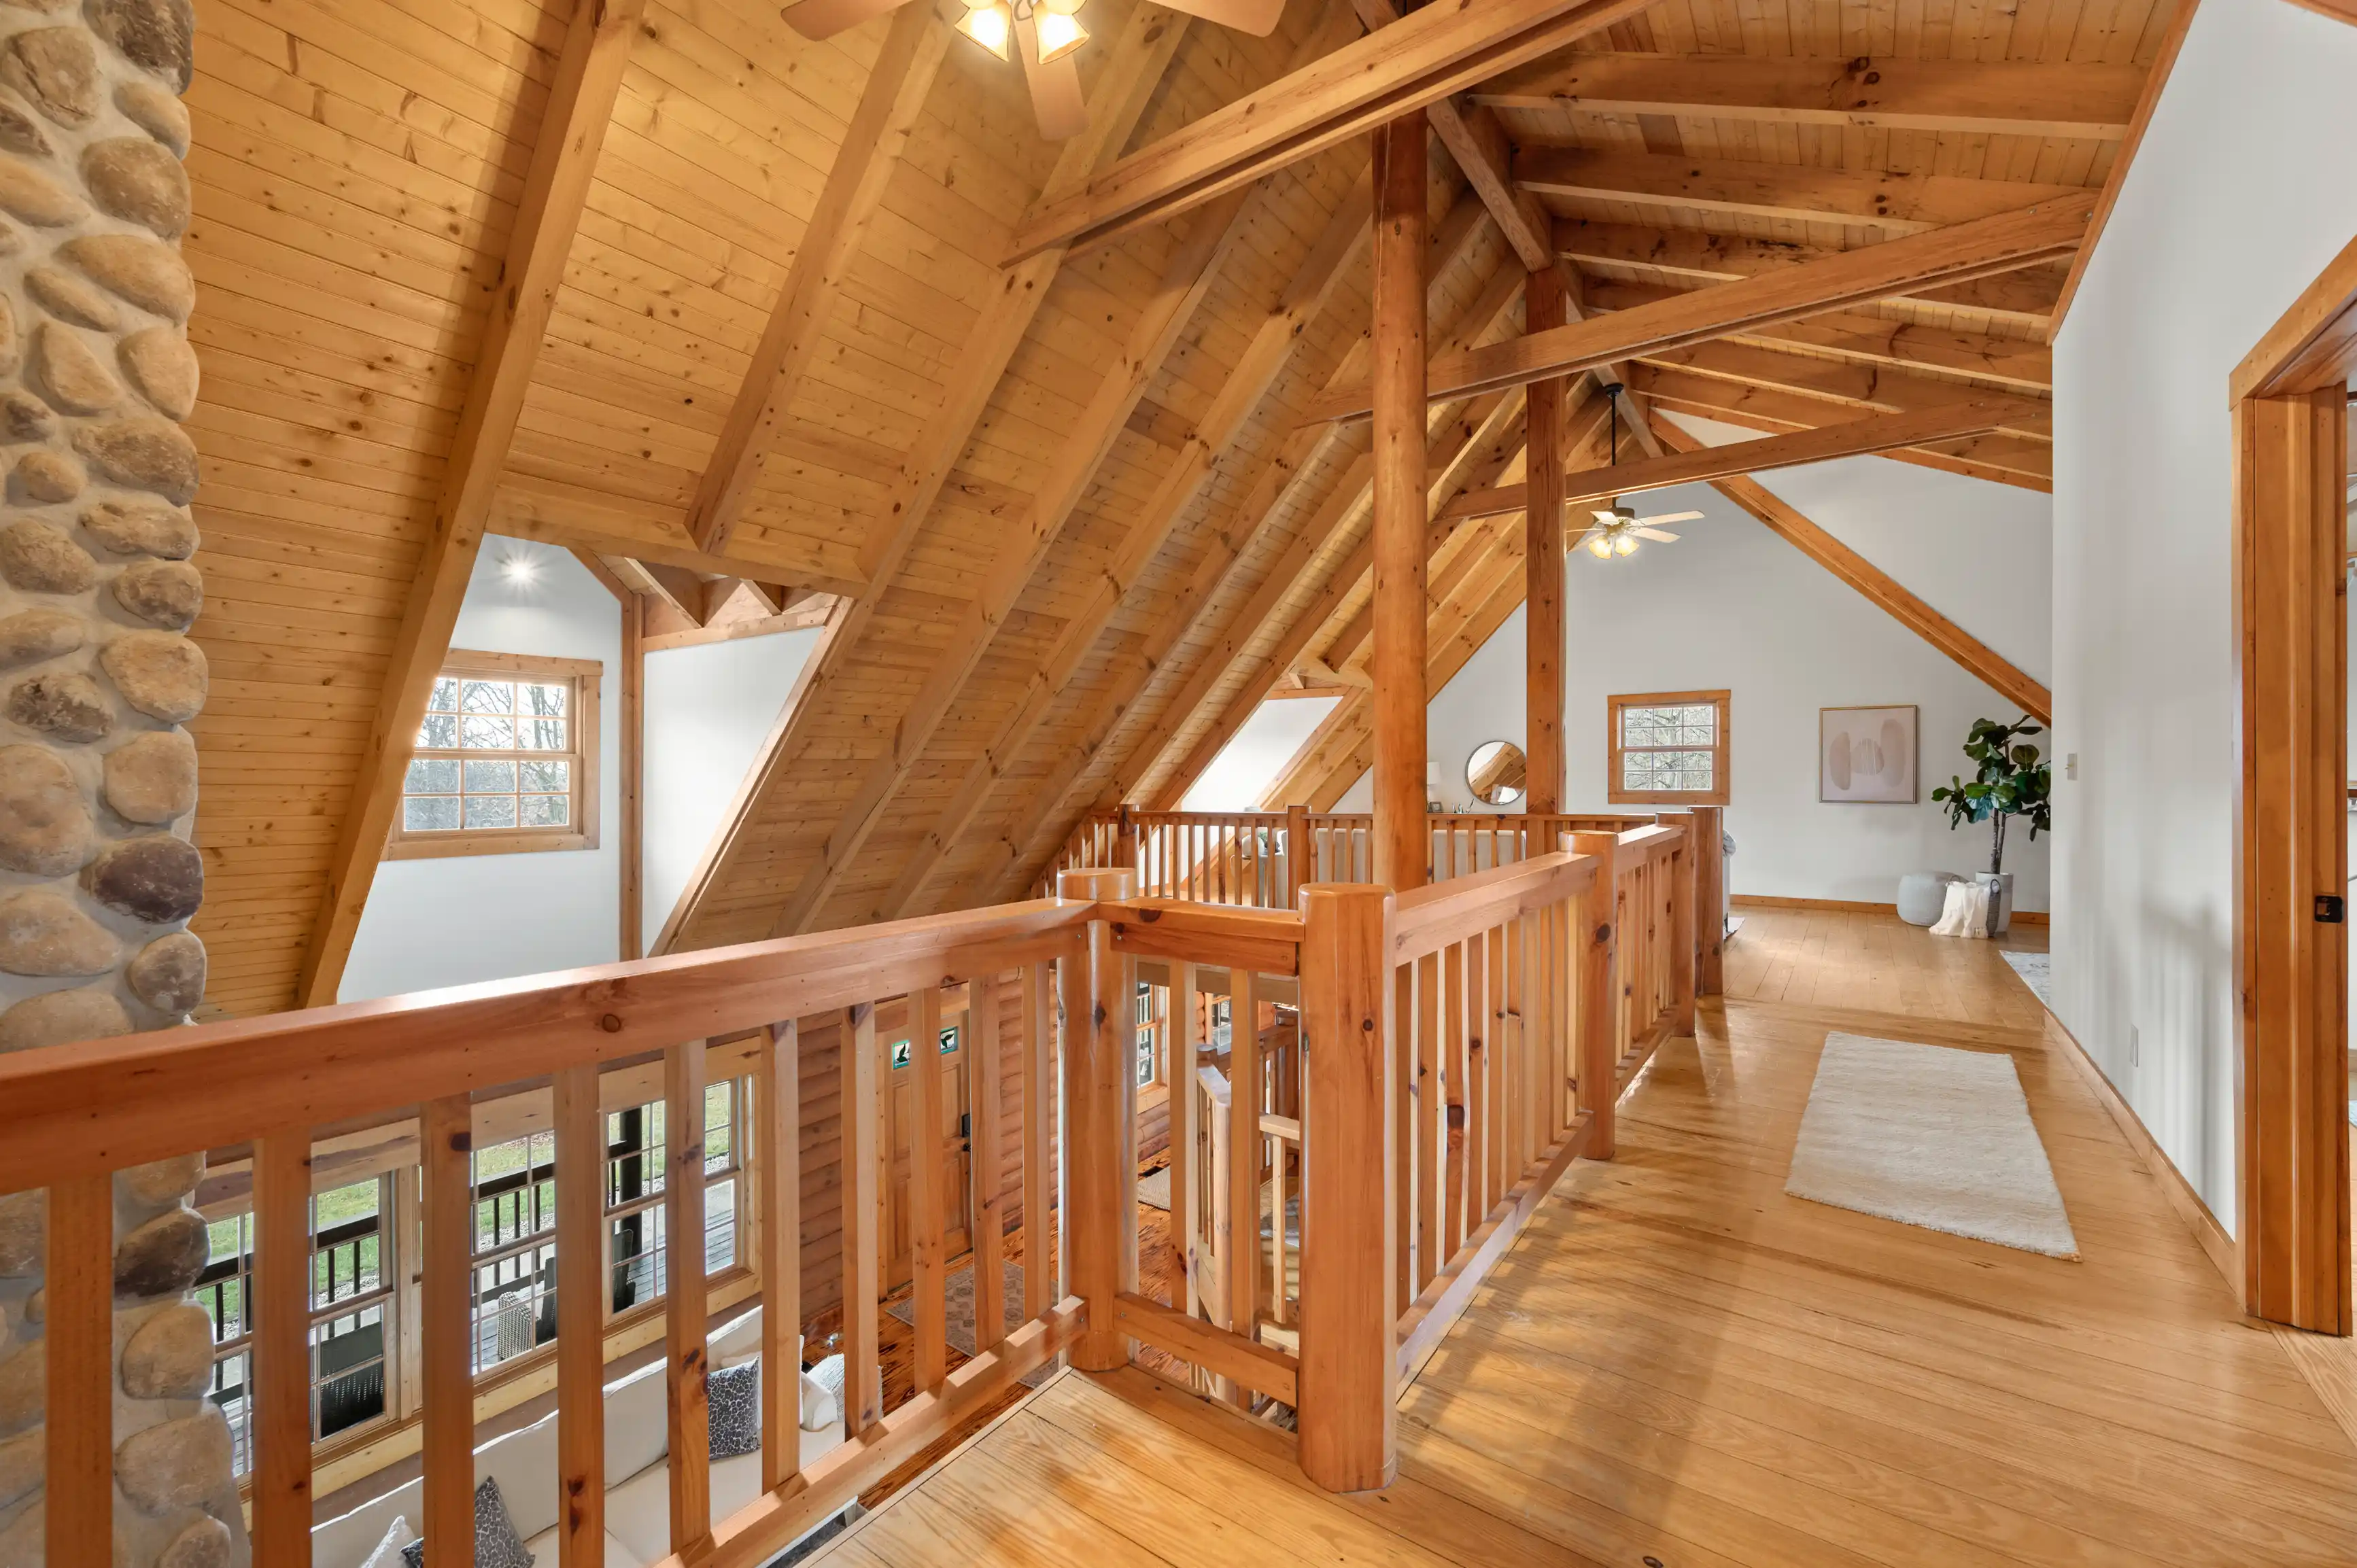 A spacious interior of a wooden attic room with exposed beams, stone column, wooden floor and guardrails, and a window letting in natural light.